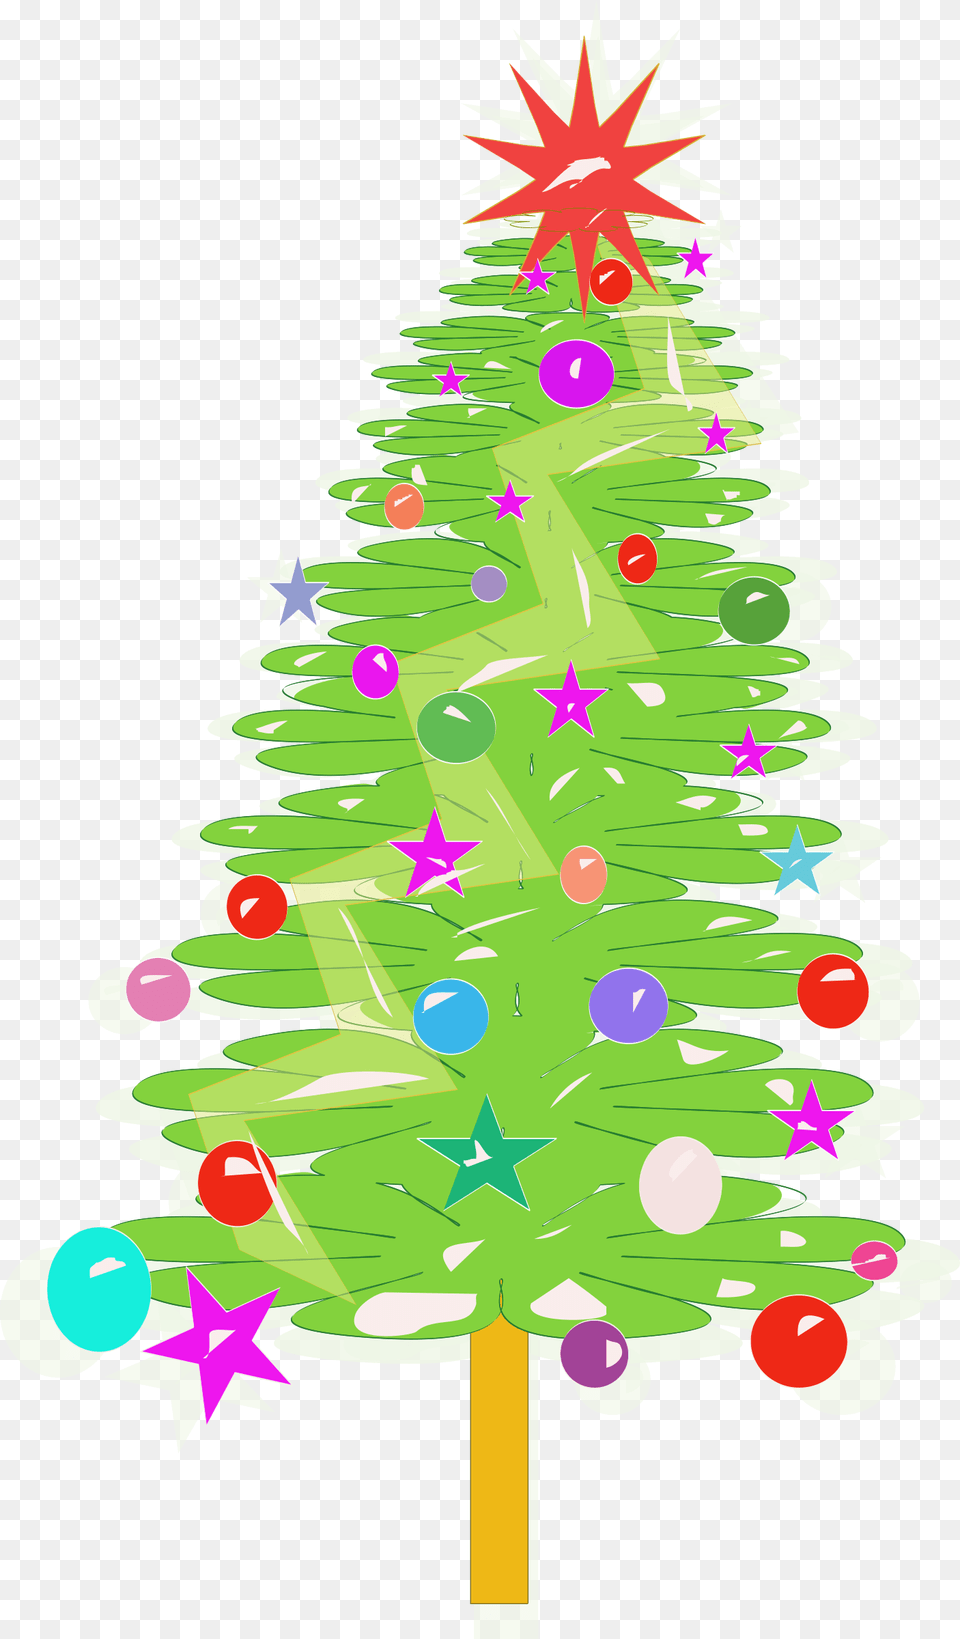 This Icons Design Of Arvore Natal, Plant, Tree, Christmas, Christmas Decorations Free Transparent Png